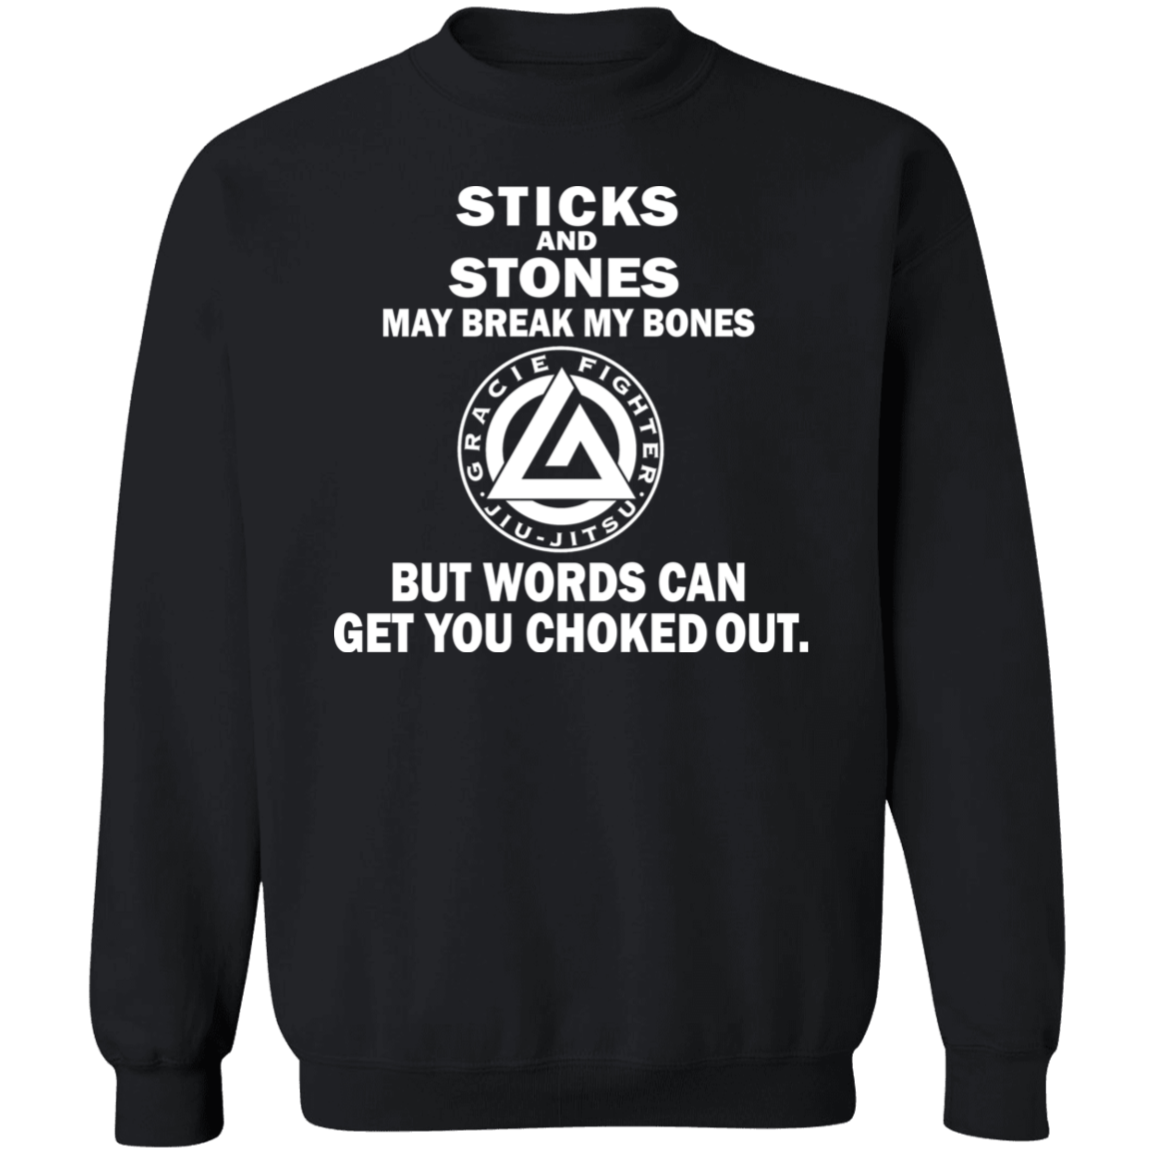 Artichoke Fight Gear Custom Design #16. Sticks And Stones May Break My Bones But Words Can Get You Choked Out. Gracie Fighter. BJJ. Crewneck Sweatshirt